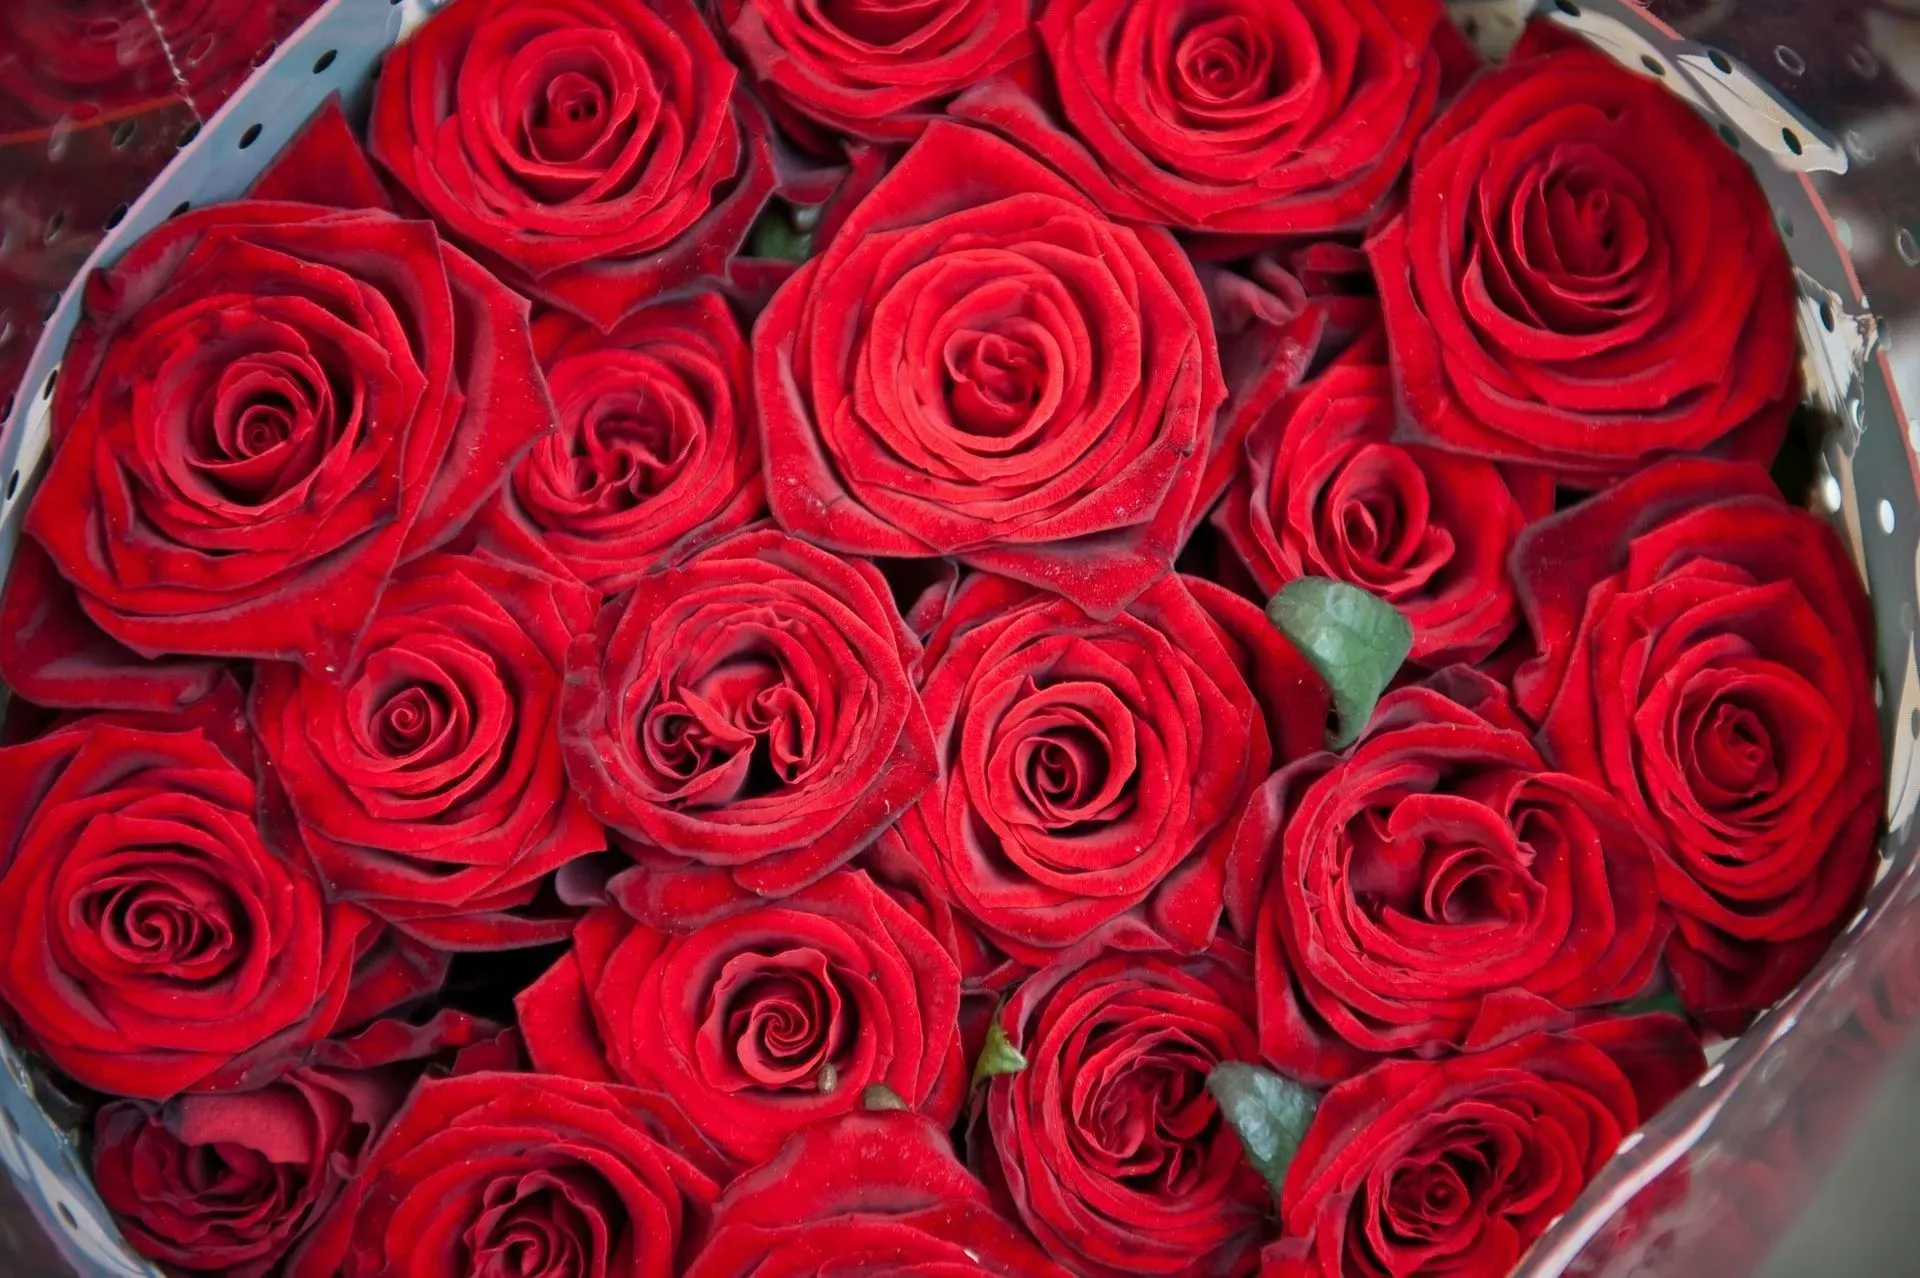 Red roses are enduring symbols of love and romance.